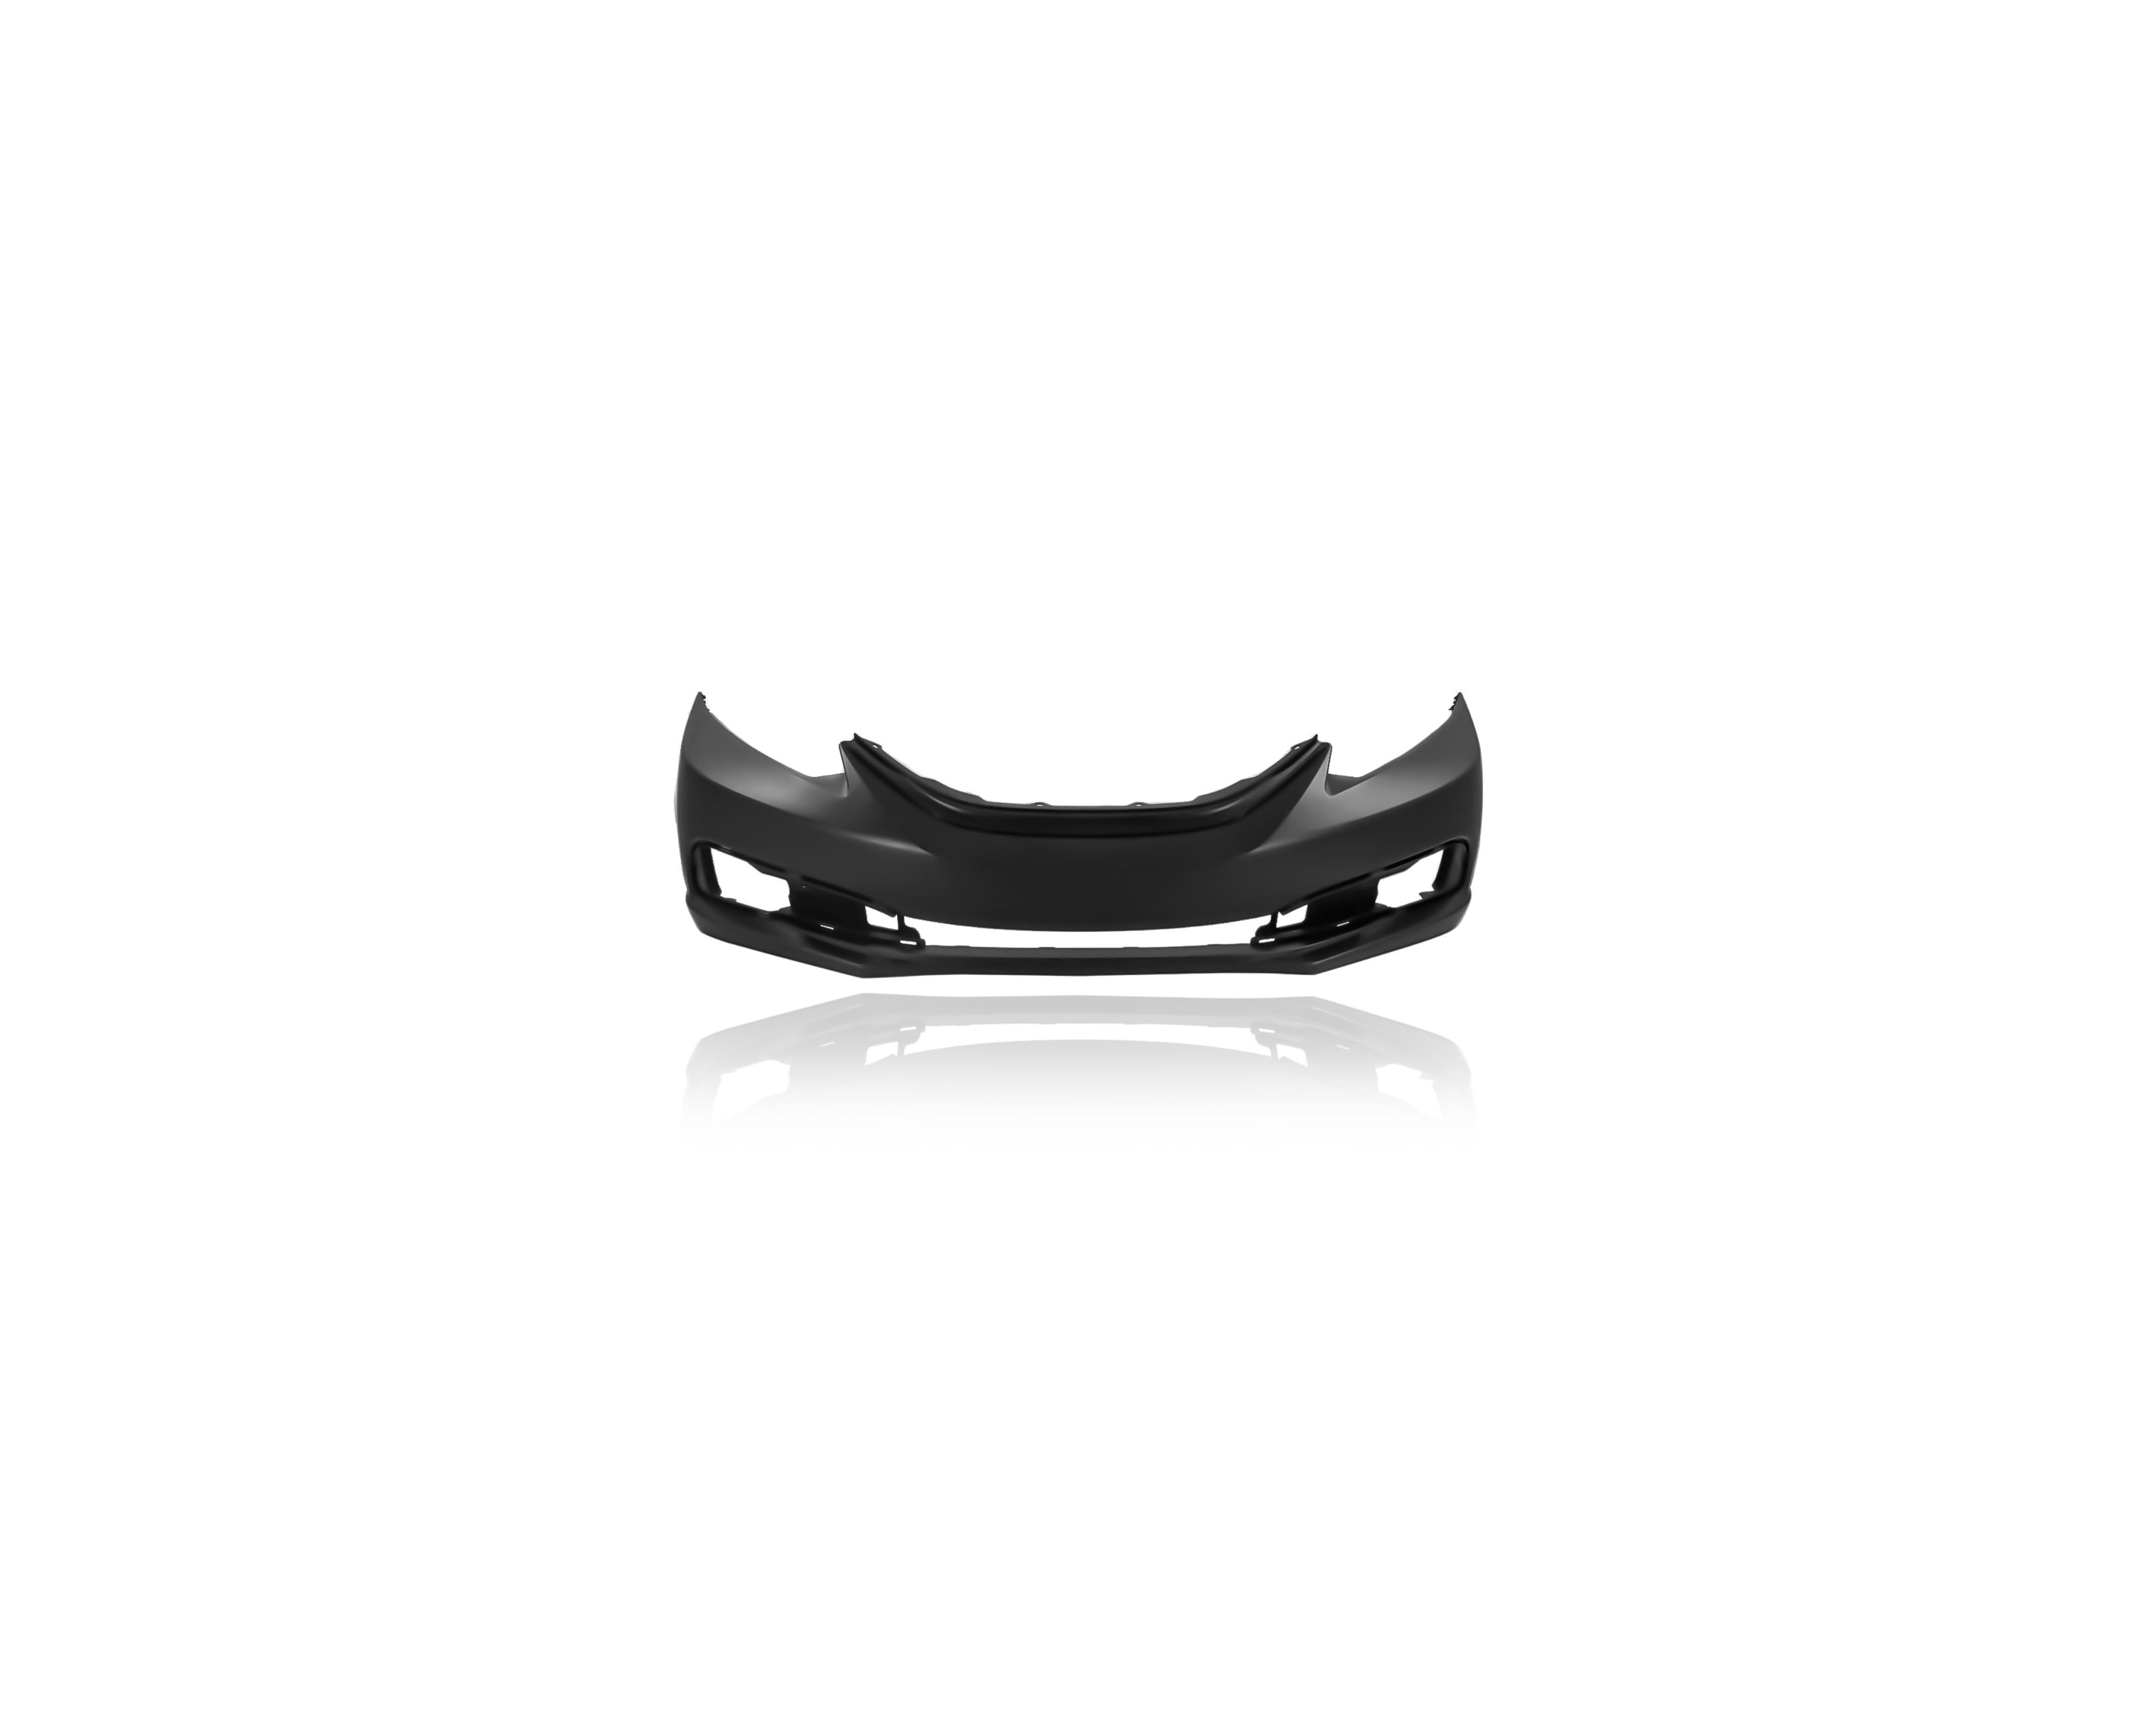 NEW PRIMED FRONT BUMPER COVER FOR 13-15 CIVIC SEDAN HO1000290 SHIPS TODAY